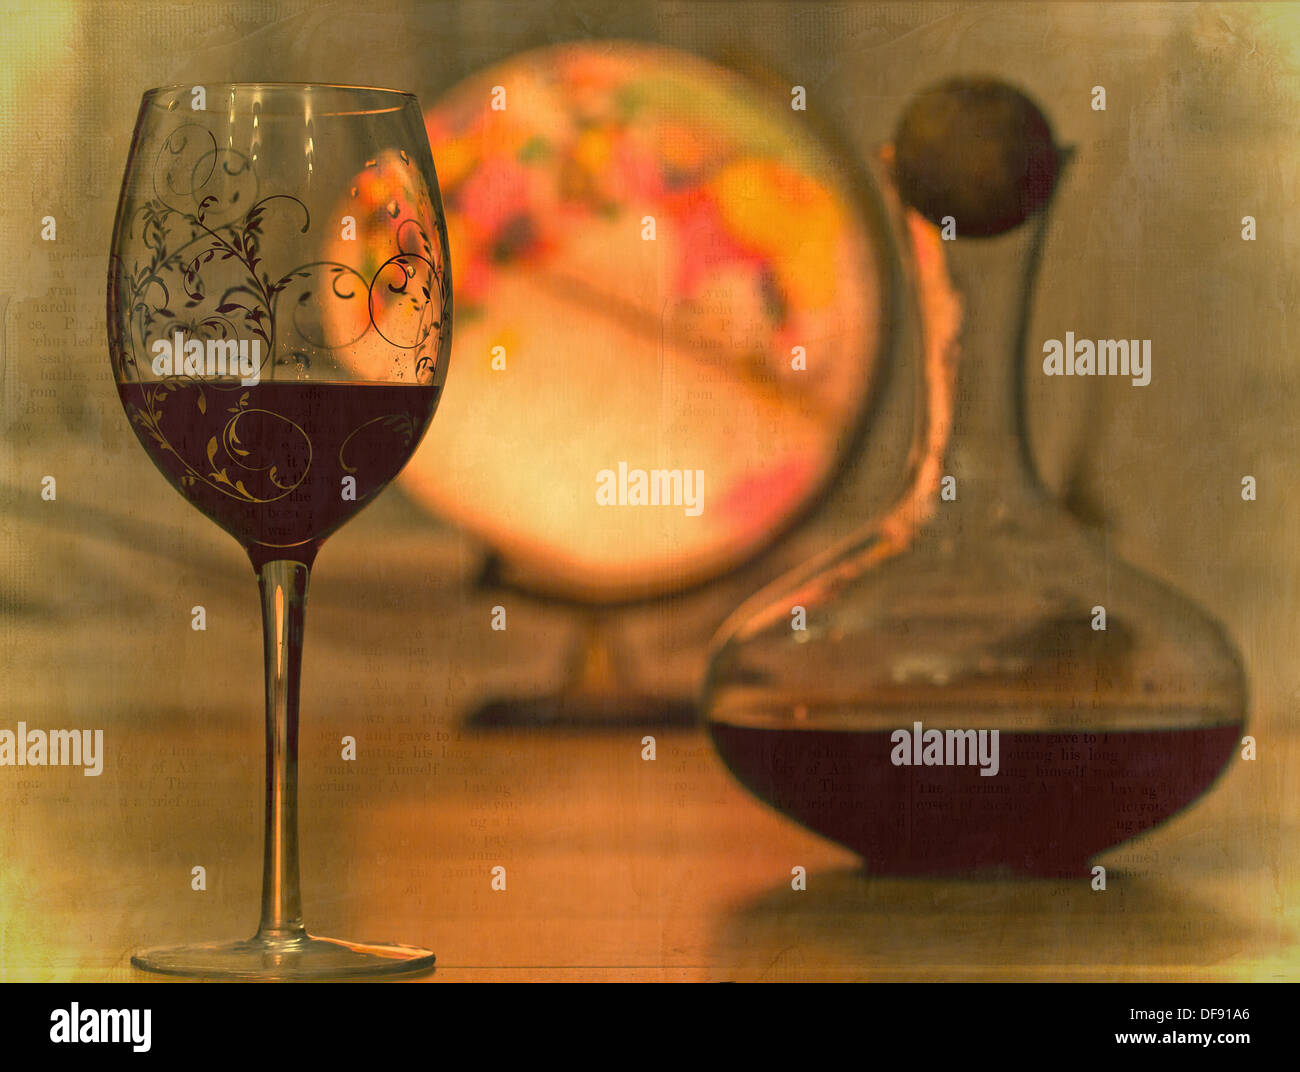 Still life image of a glass of wine, carafe and a globe. Stock Photo